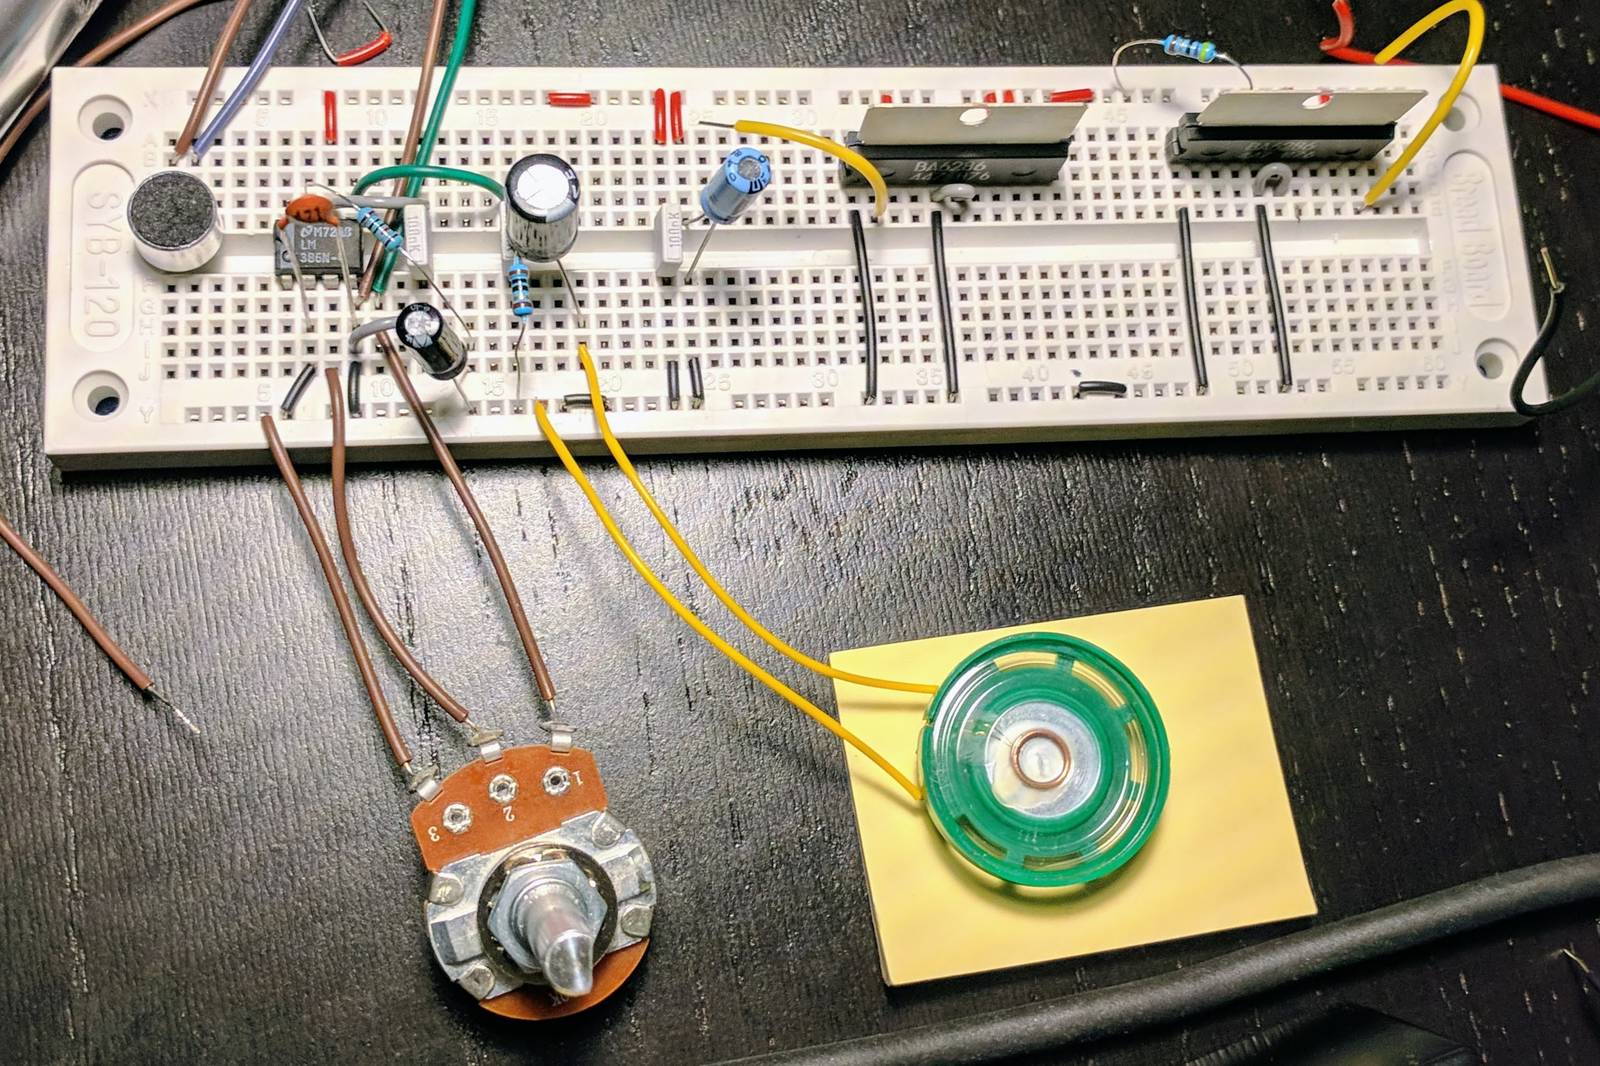 Breadboard with amplifier and motor circuits